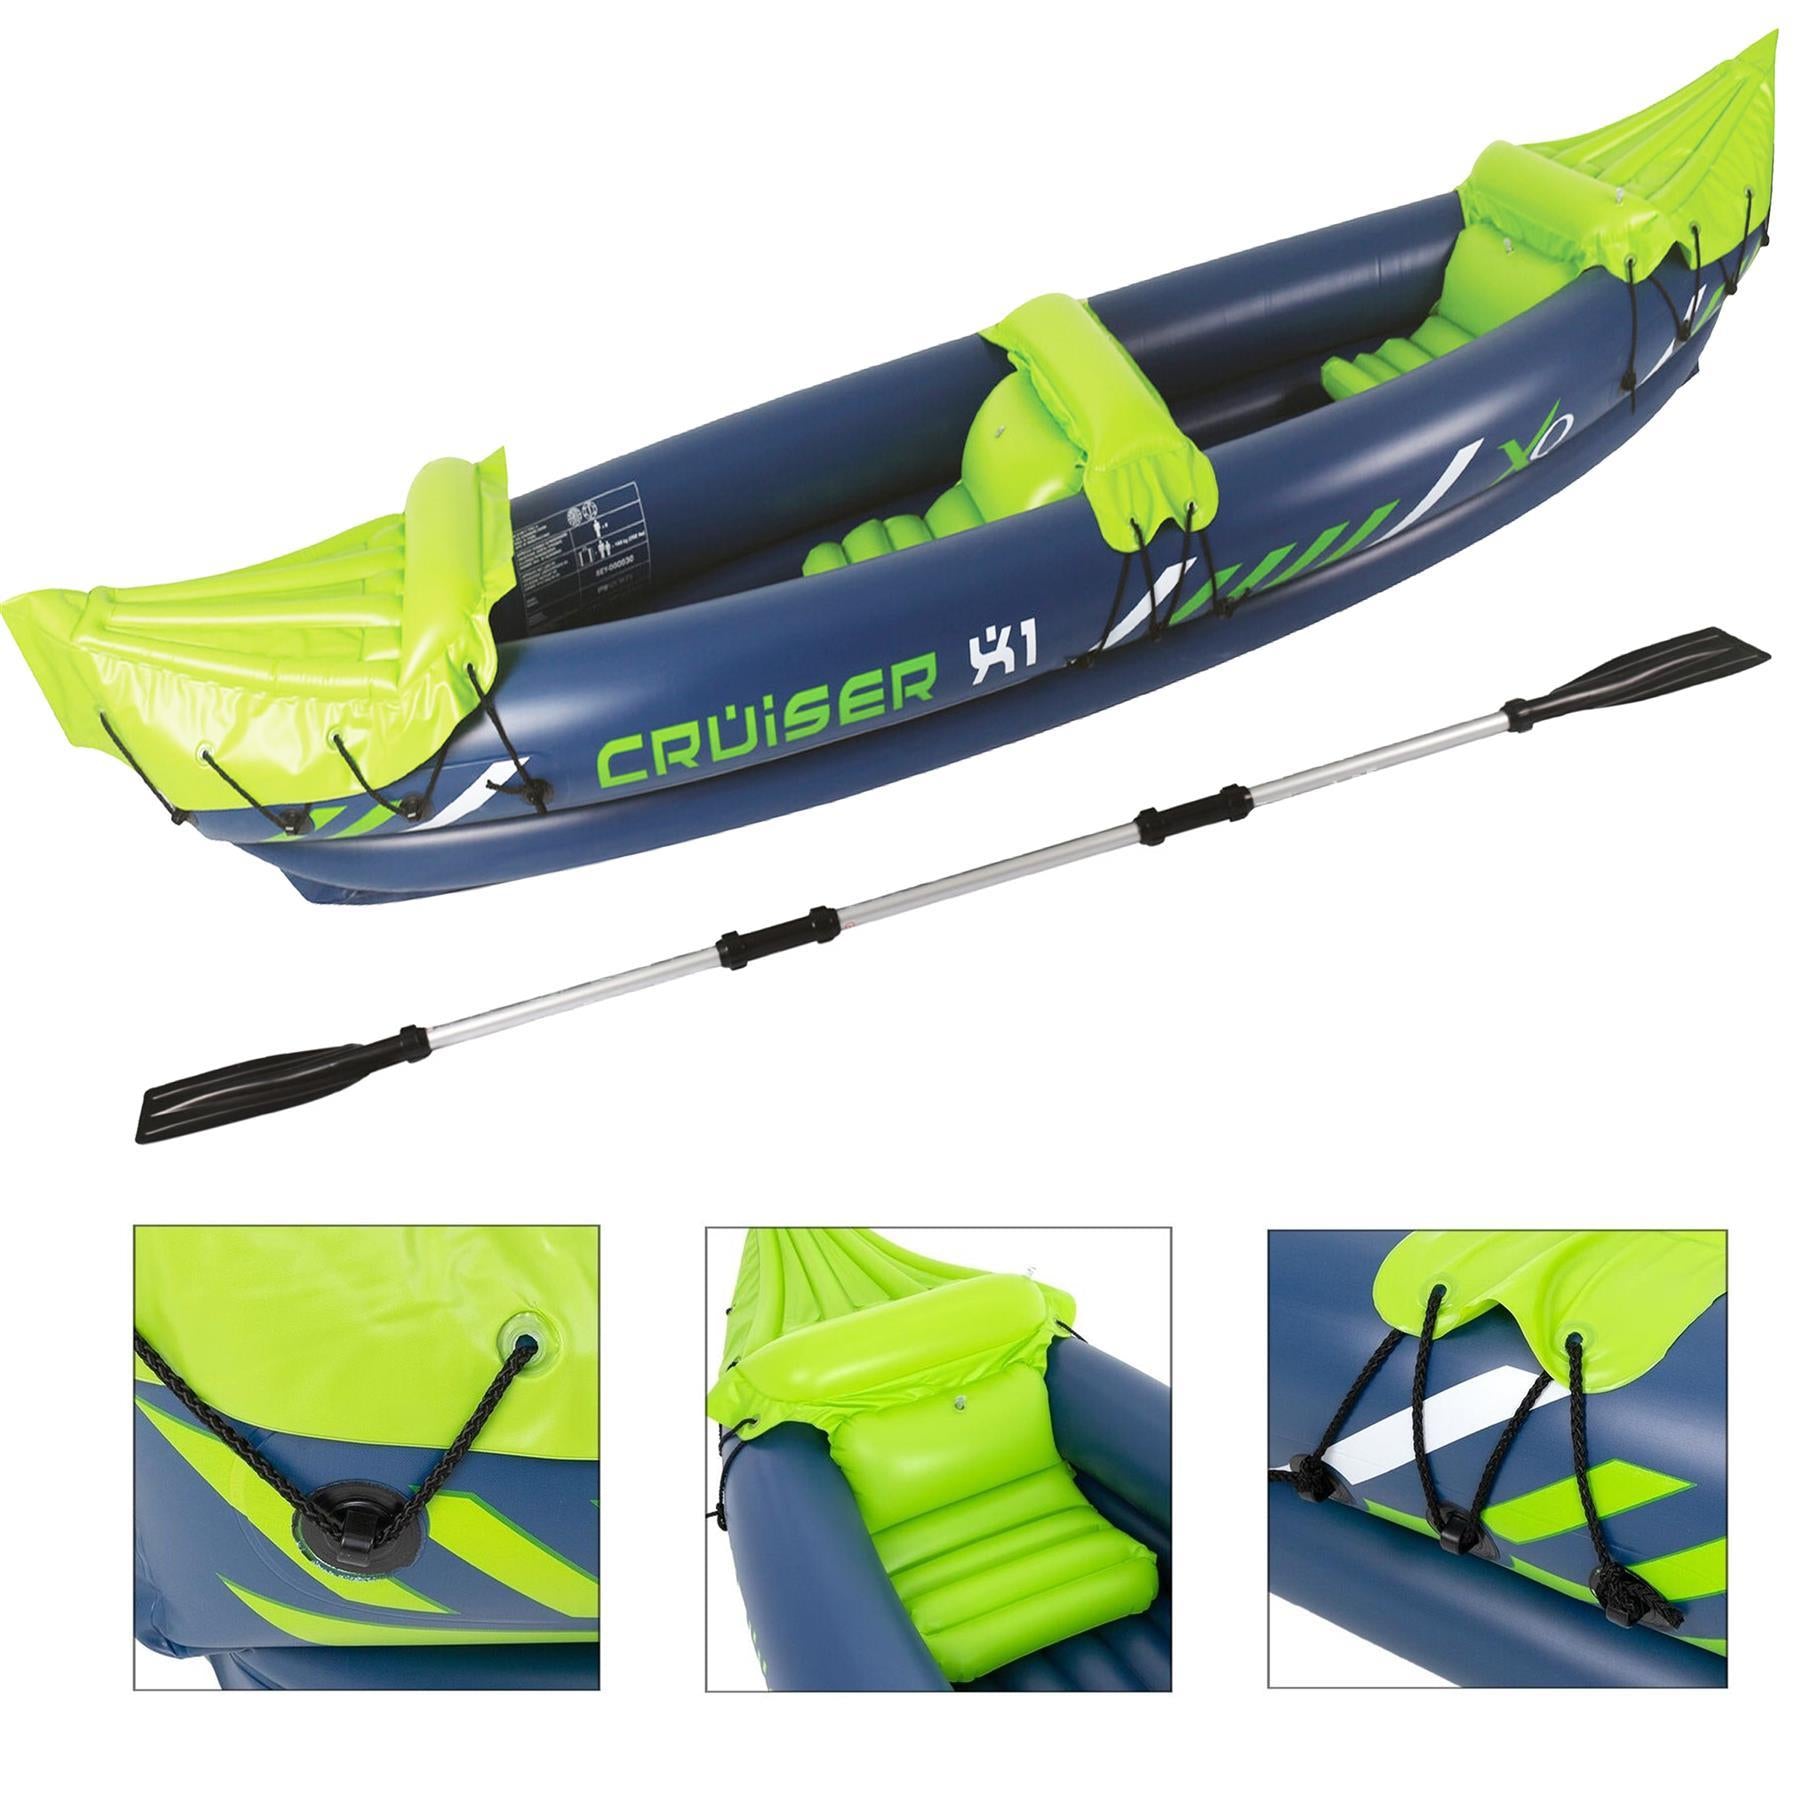 GEEZY Sporting Goods GEEZY 2 Man Person Inflatable Canoe Kayak Dinghy Boat with Double Paddle